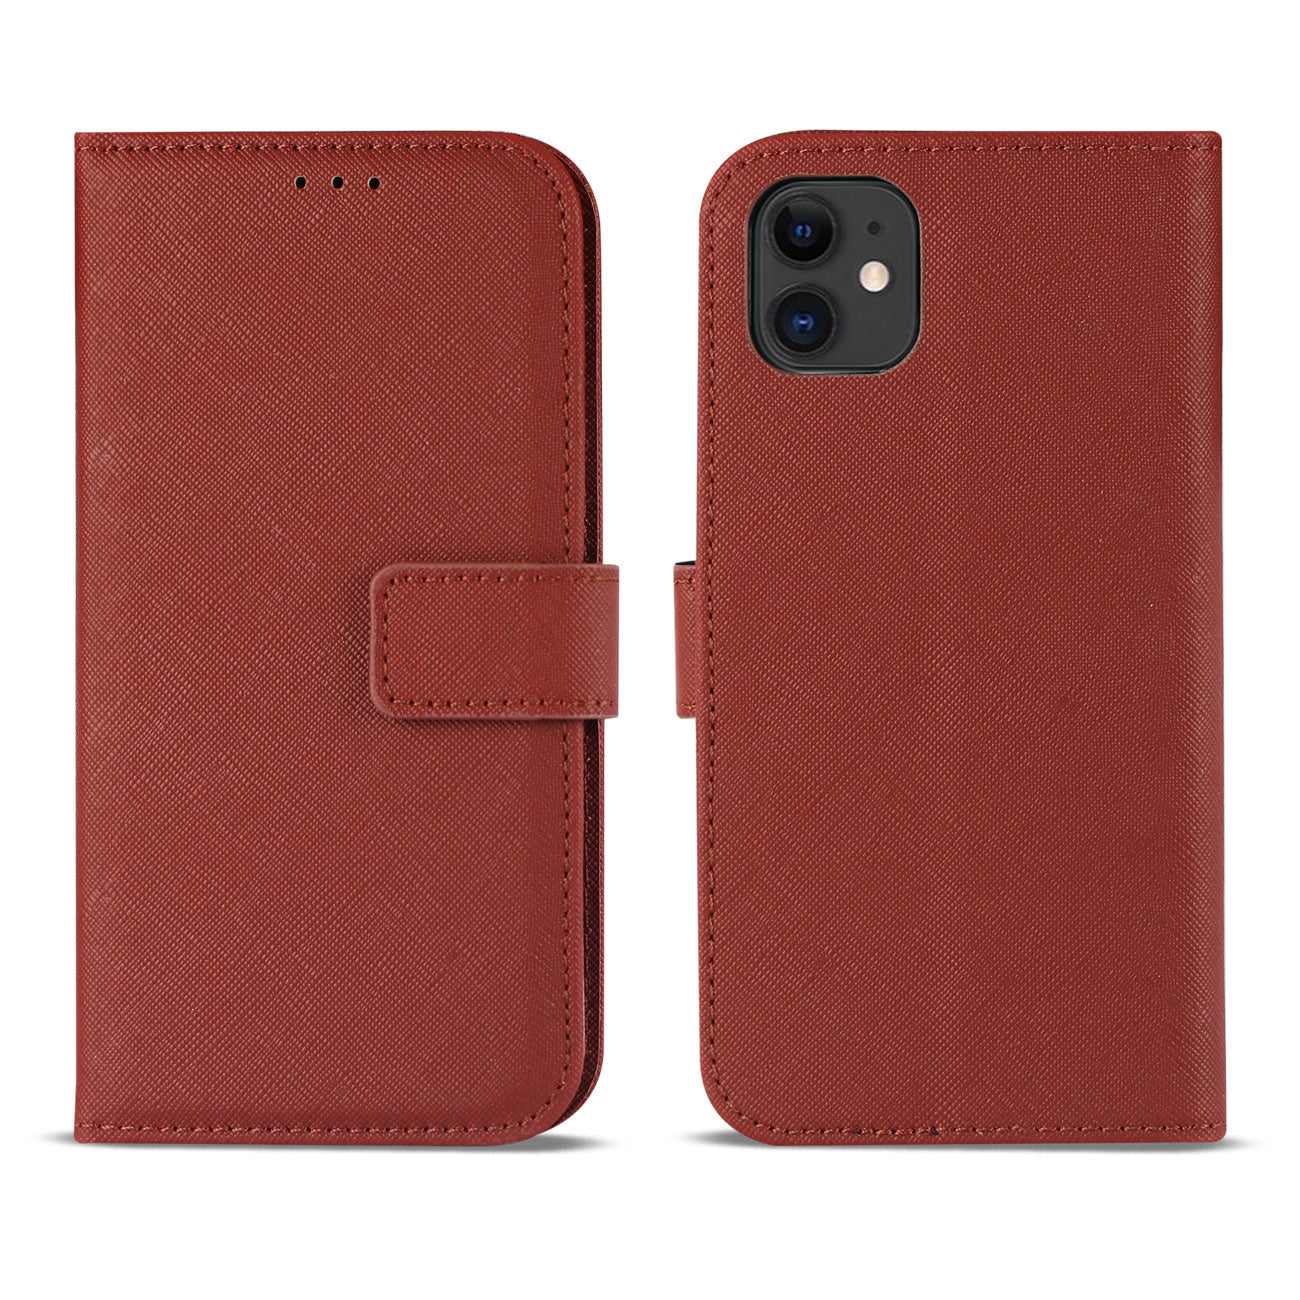 Case Slim Stand With Card Slots Apple iPhone 12 Mini Red Color